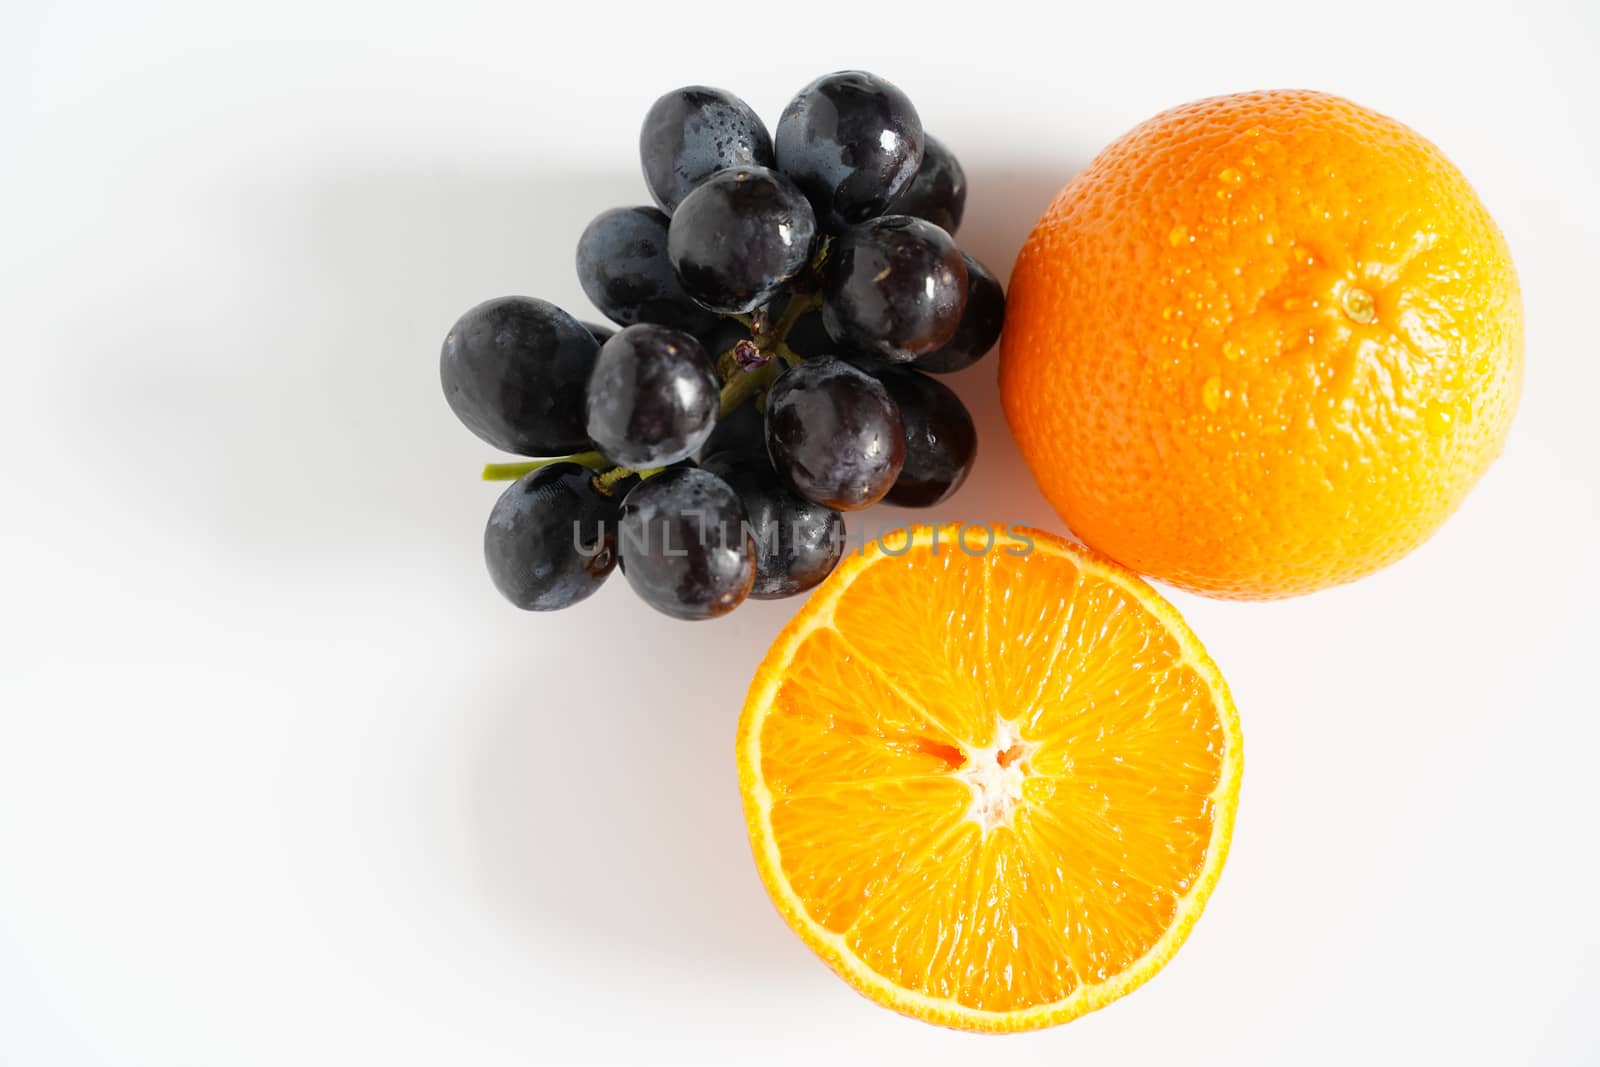 An orange sliced in half and a bunch of black grapes against a plain white background